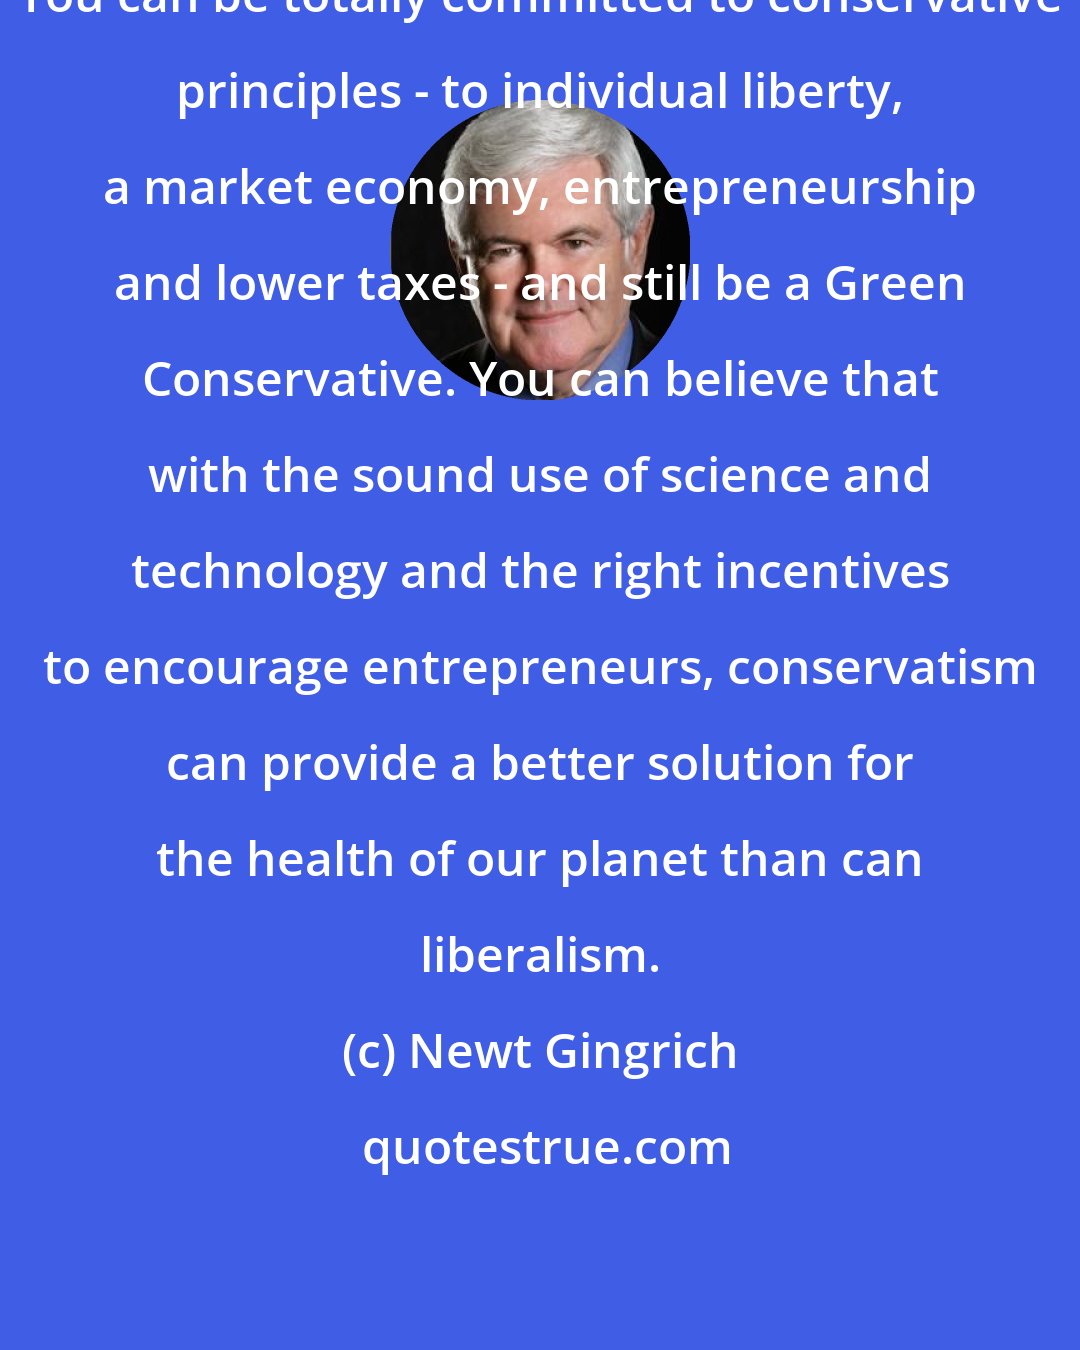 Newt Gingrich: You can be totally committed to conservative principles - to individual liberty, a market economy, entrepreneurship and lower taxes - and still be a Green Conservative. You can believe that with the sound use of science and technology and the right incentives to encourage entrepreneurs, conservatism can provide a better solution for the health of our planet than can liberalism.